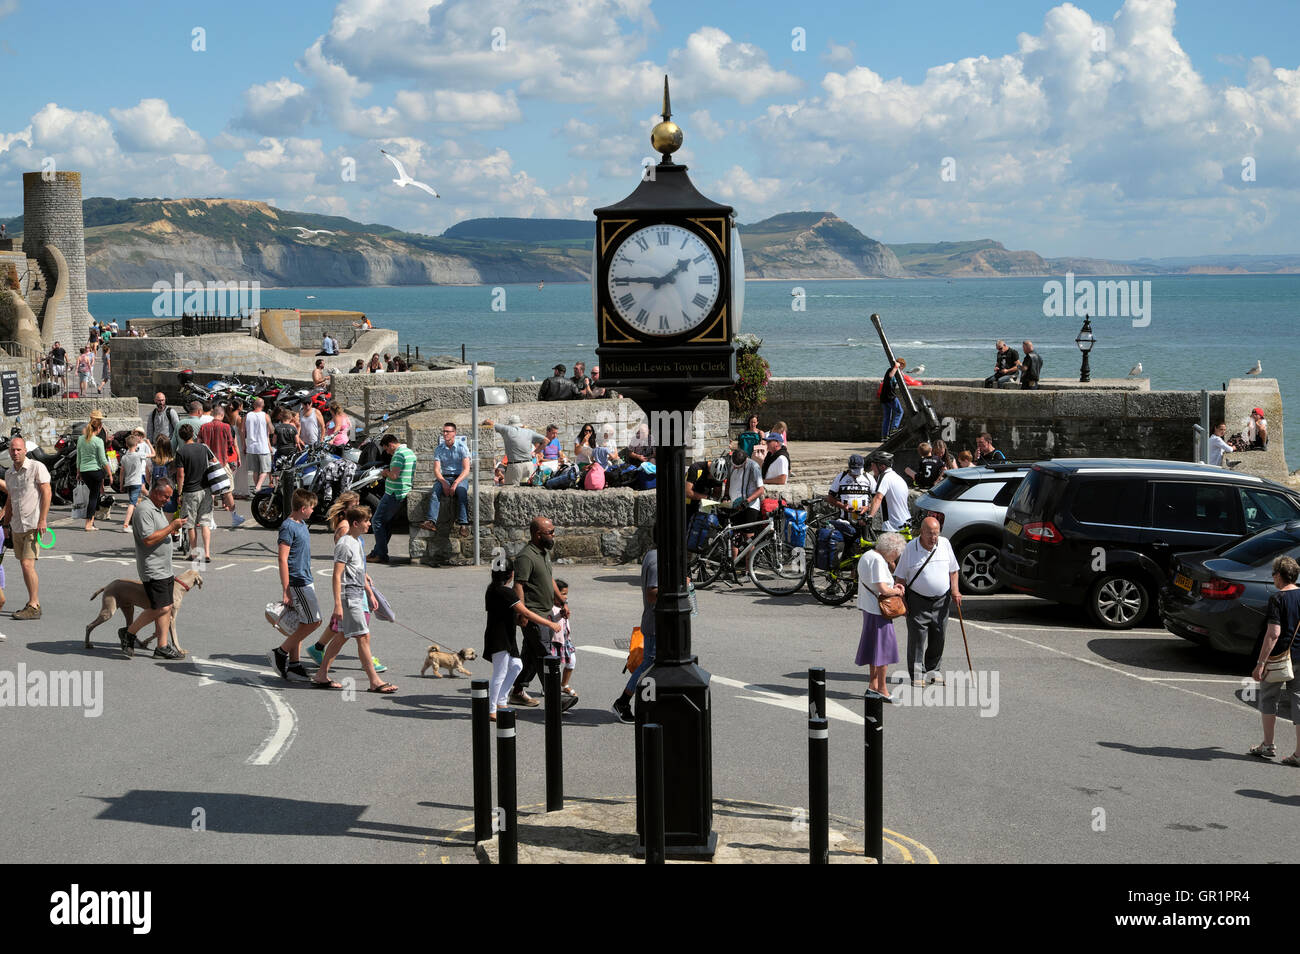 Memorial clock and people in the town Square Lyme Regis, Dorset England UK    KATHY DEWITT Stock Photo